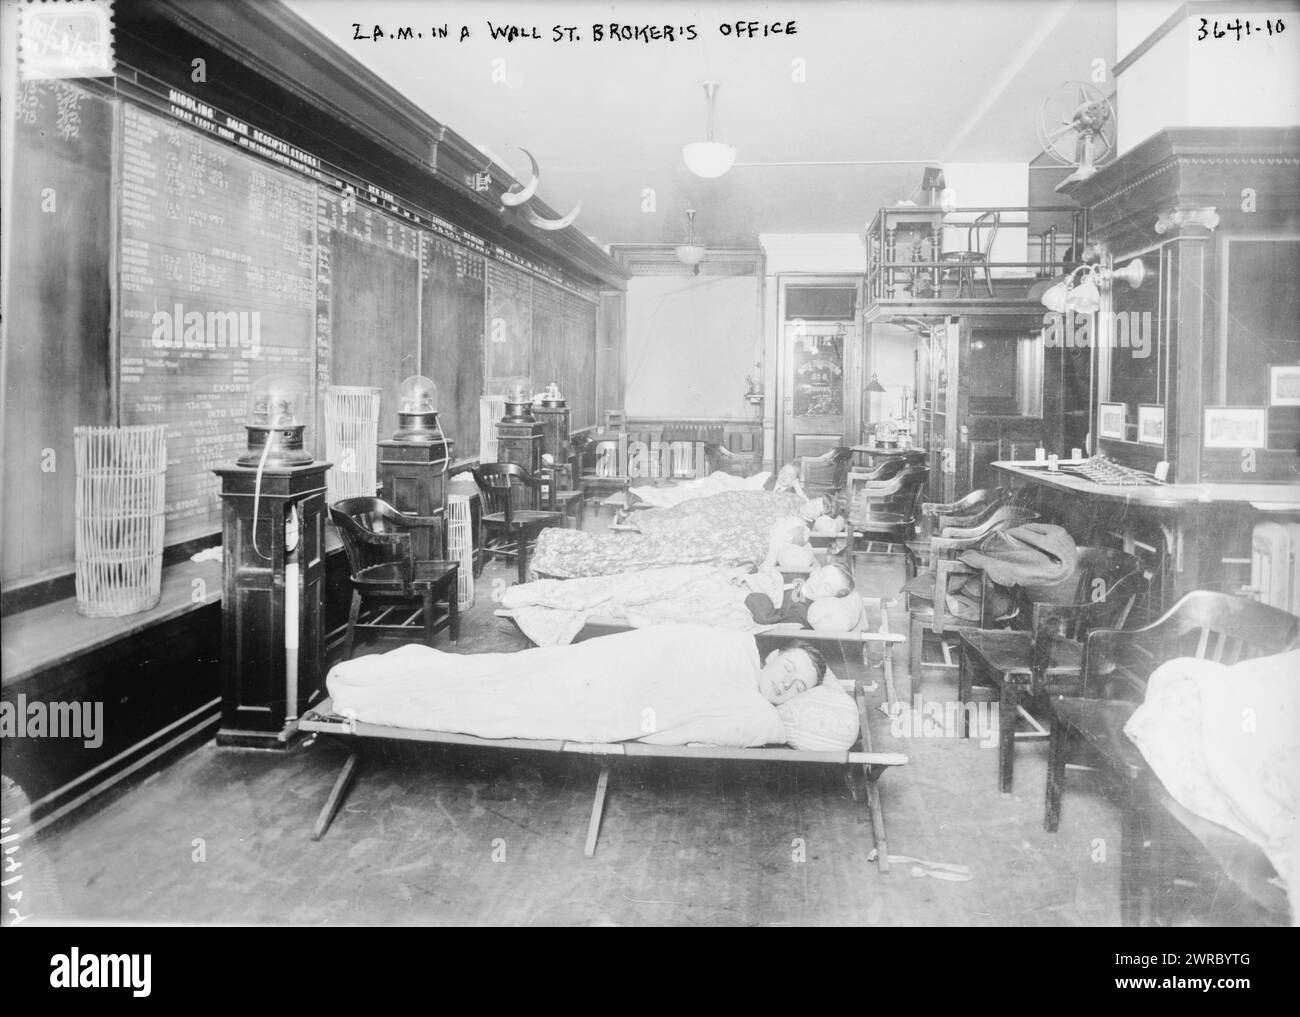 2 A. M. in a Wall St. broker's office, between ca. 1910 and ca. 1915, Glass negatives, 1 negative: glass Stock Photo